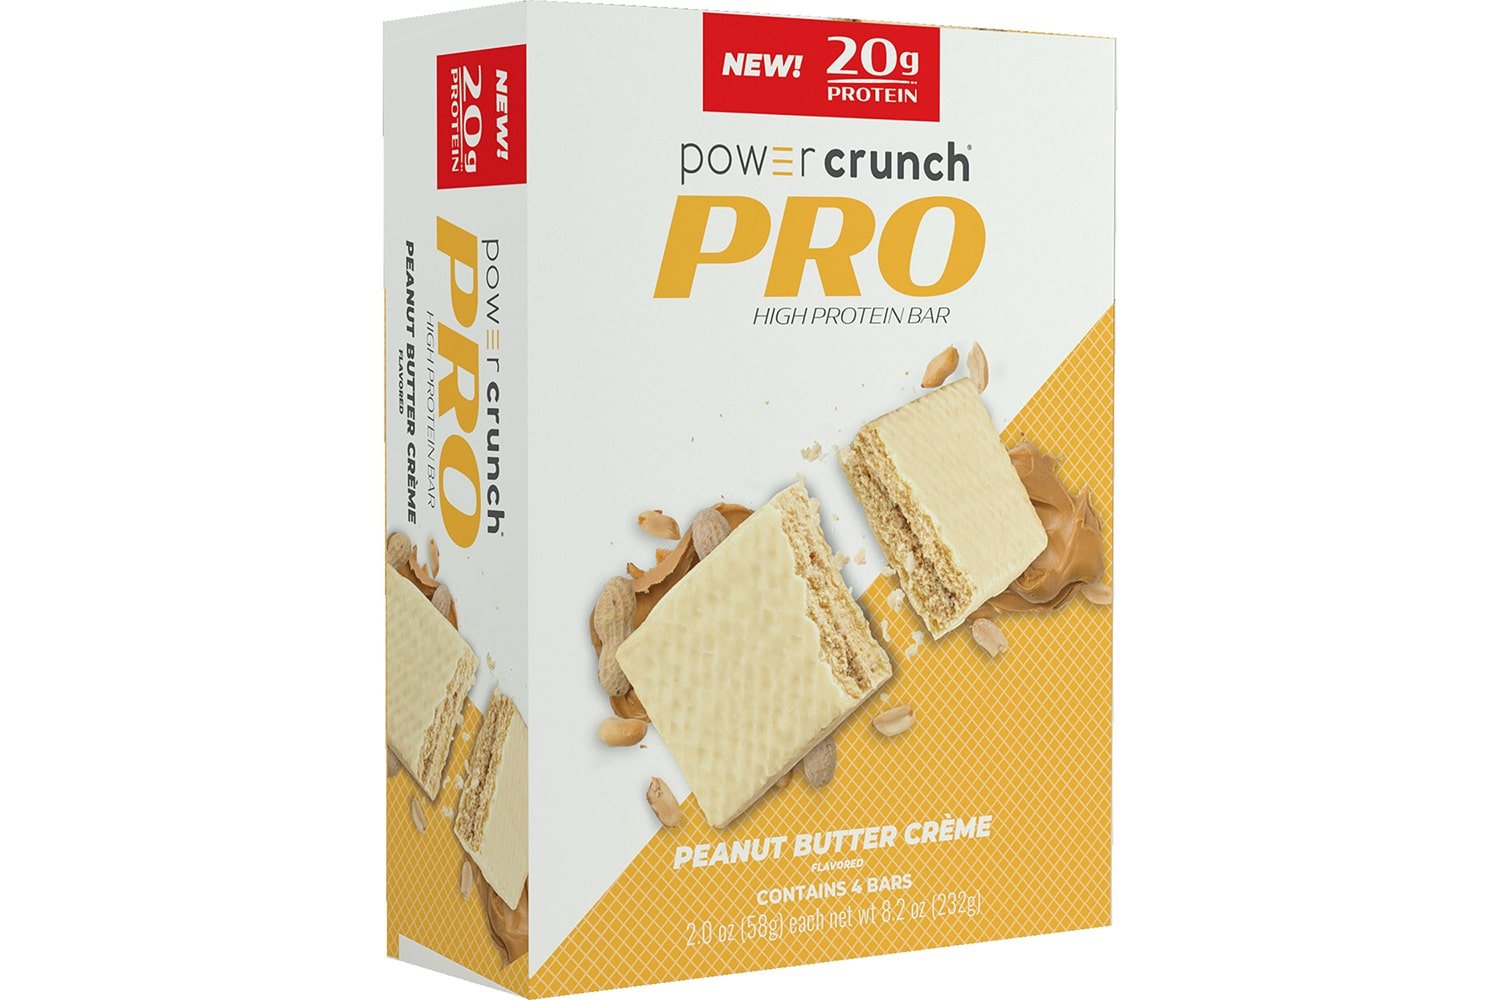 Box of Power Crunch Pro Peanut Butter 20g protein bars